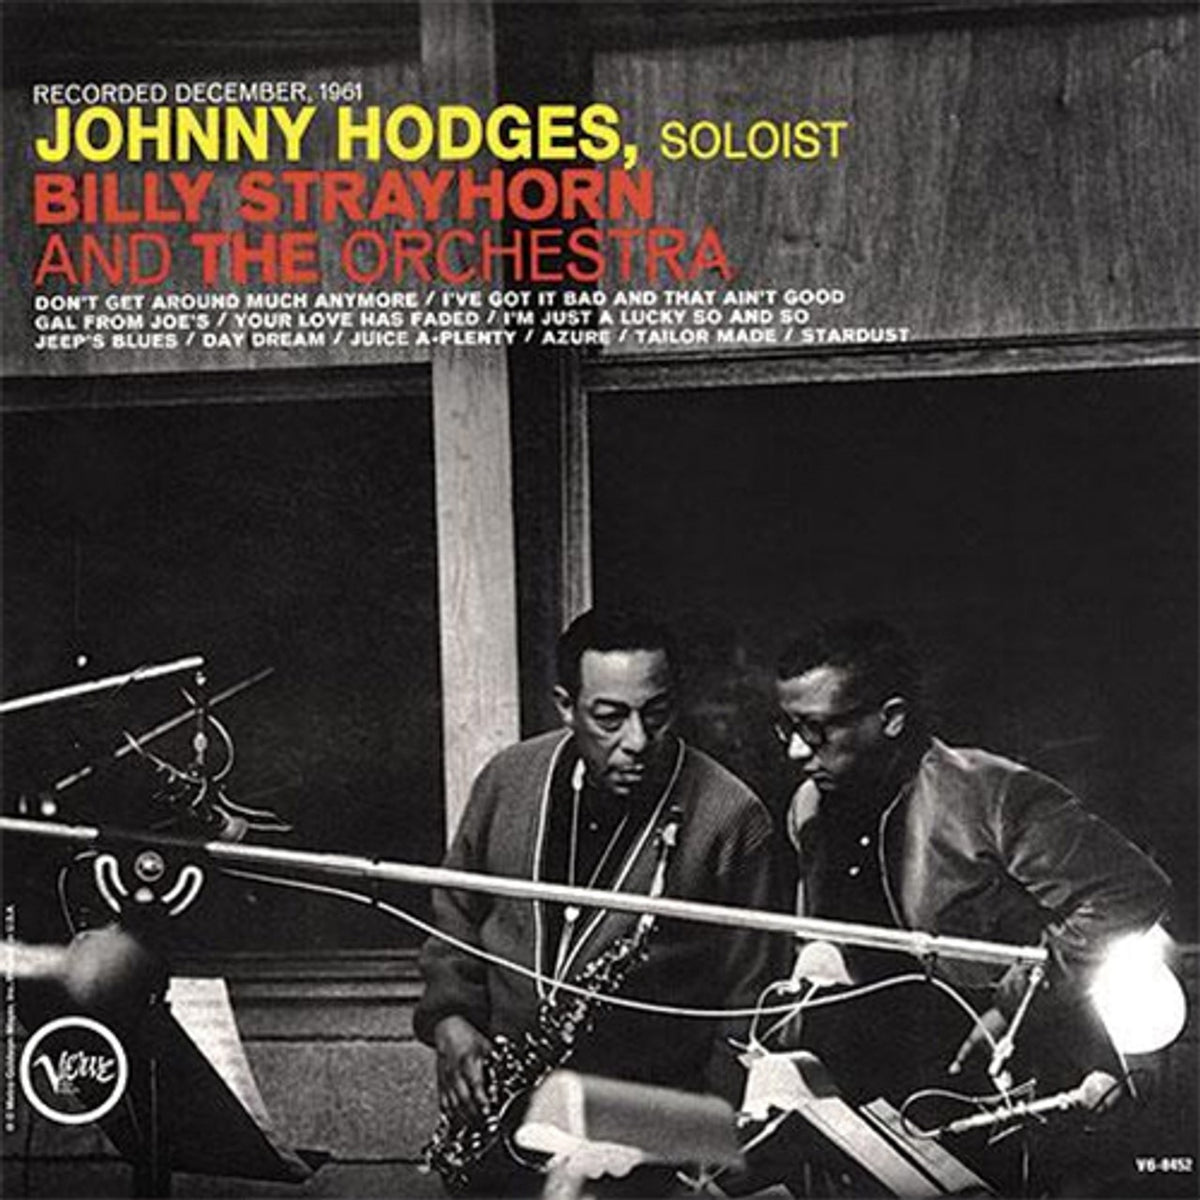 Johnny Hodges - With Billy Strayhorn And The Orchestra 2LP (180g, 45rpm, Analogue Productions)